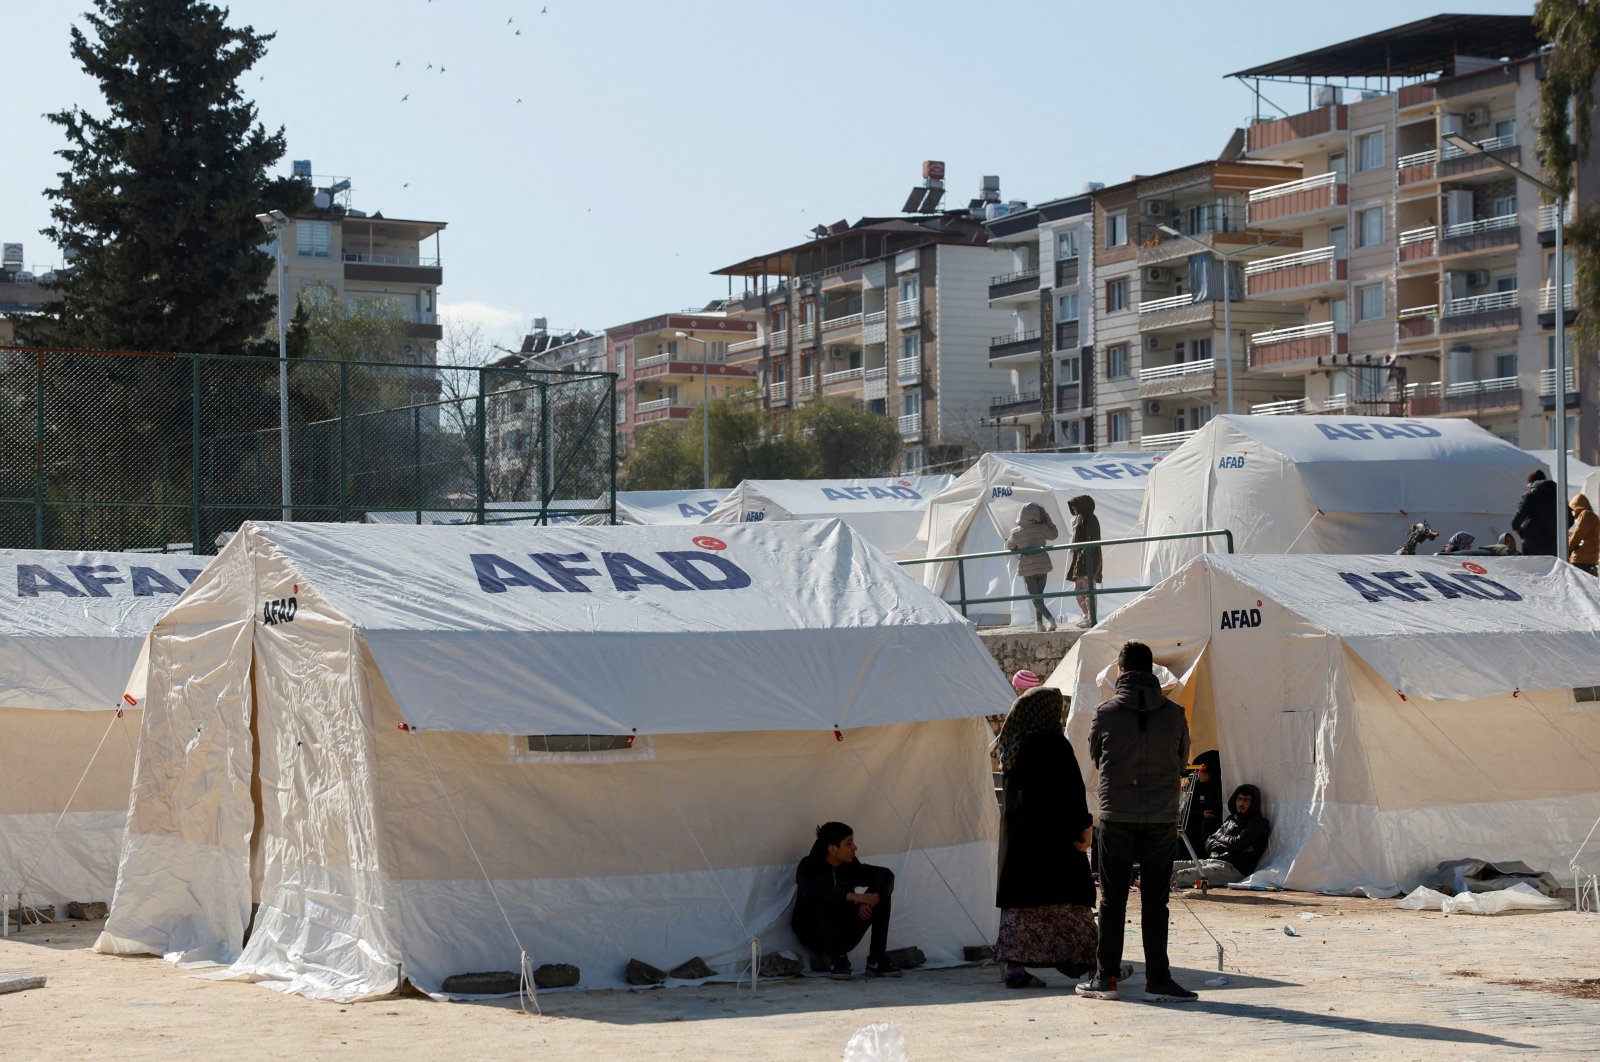 The Disaster and Emergency Management Authority&#039;s (AFAD) temporary shelter for earthquake survivors, in the aftermath of the twin earthquakes, Hatay, Türkiye, Feb. 8, 2023. (Reuters File Photo)